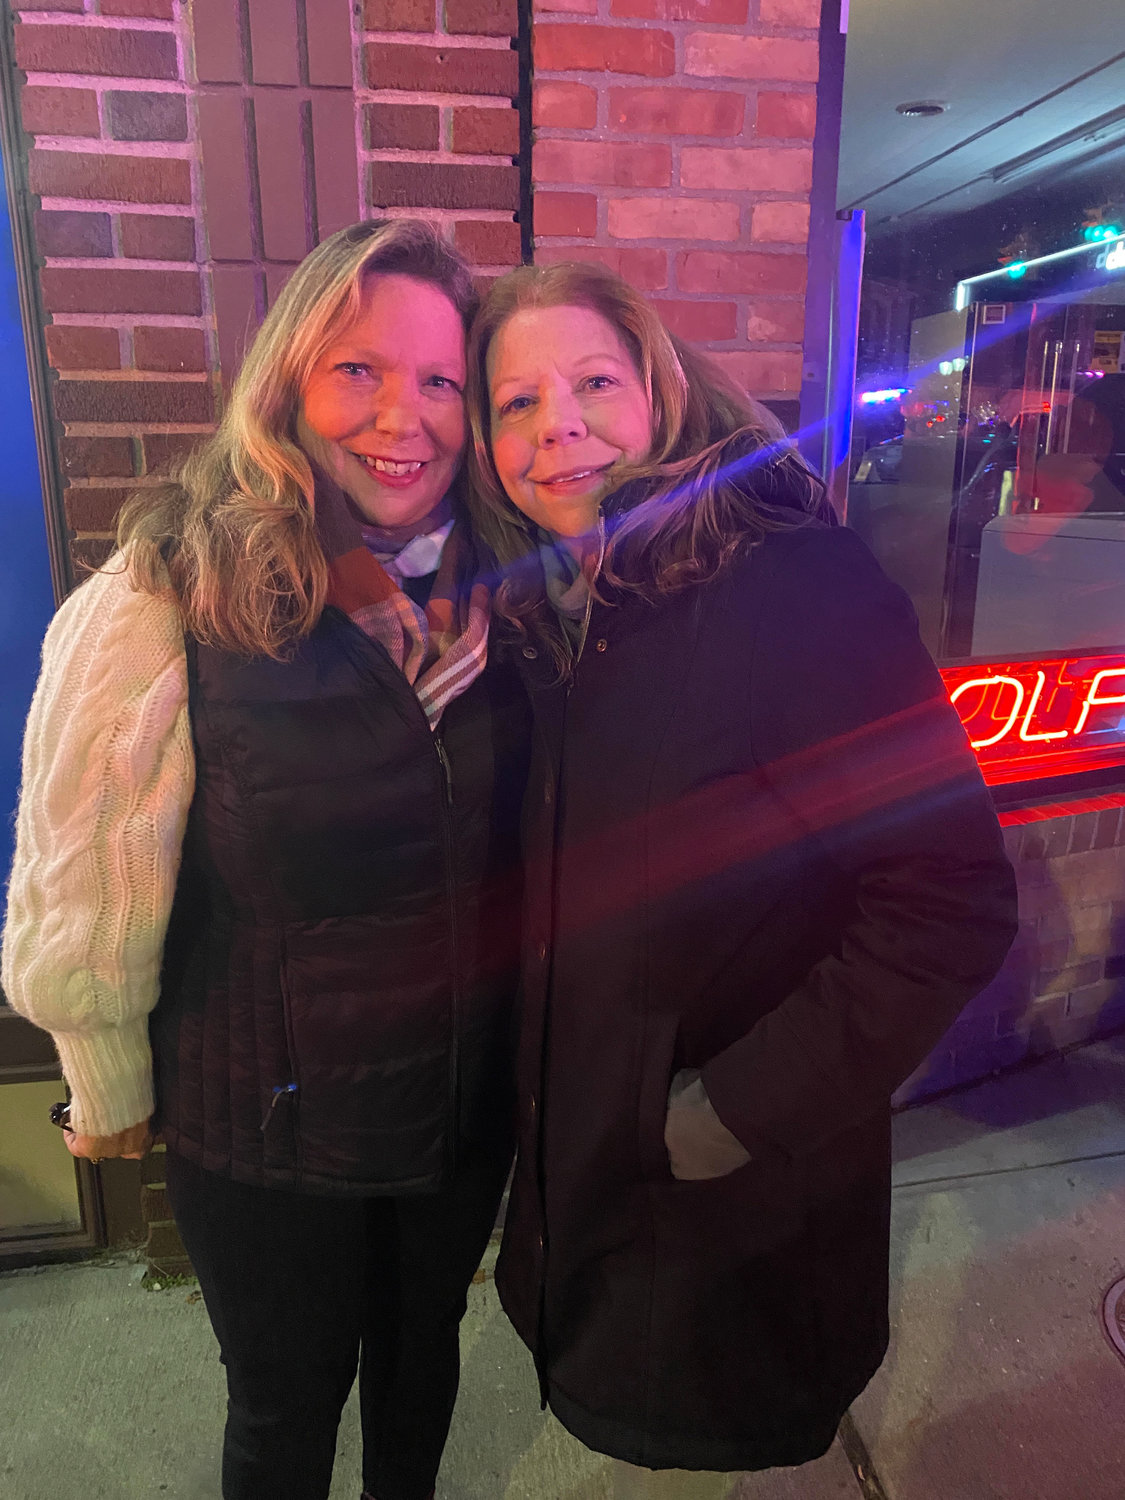 Joanne Ziminski and Linda SchultzJoanne Ziminski 
“To quit smoking. It’s got to happen, and so
it’s going to happen this year.”

Linda Schultz
“It’s not necessarily a resolution,
but I want happiness and health for my
family this year. That’s it.”